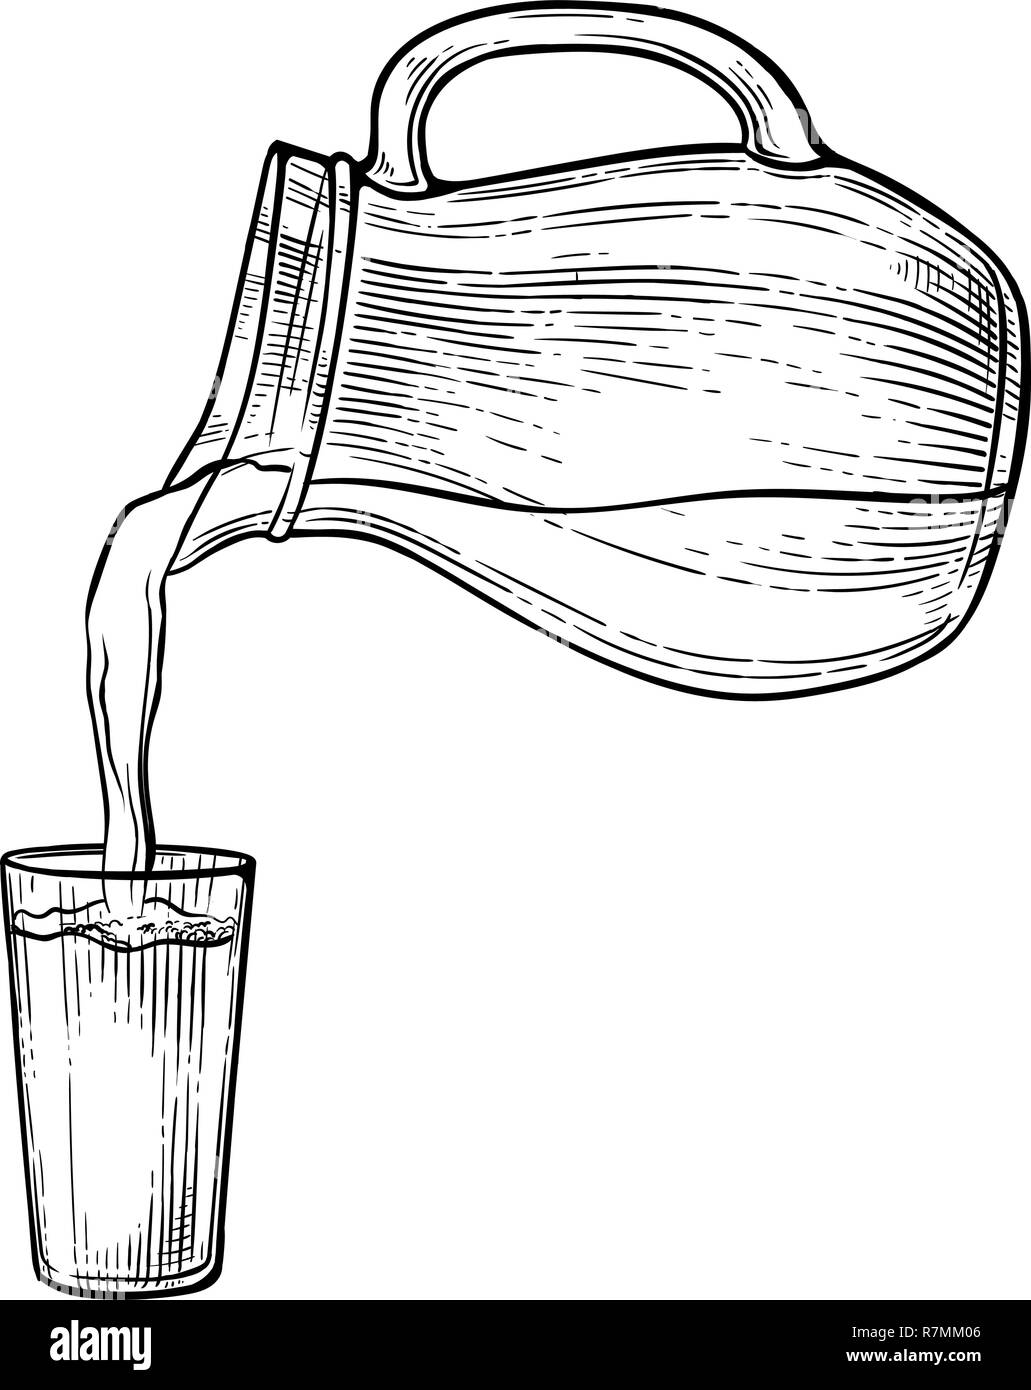 Glass of Water. Vector Linear Illustration in Sketch Style. Glass Cup with  Water Stock Illustration - Illustration of cold, clear: 168553636